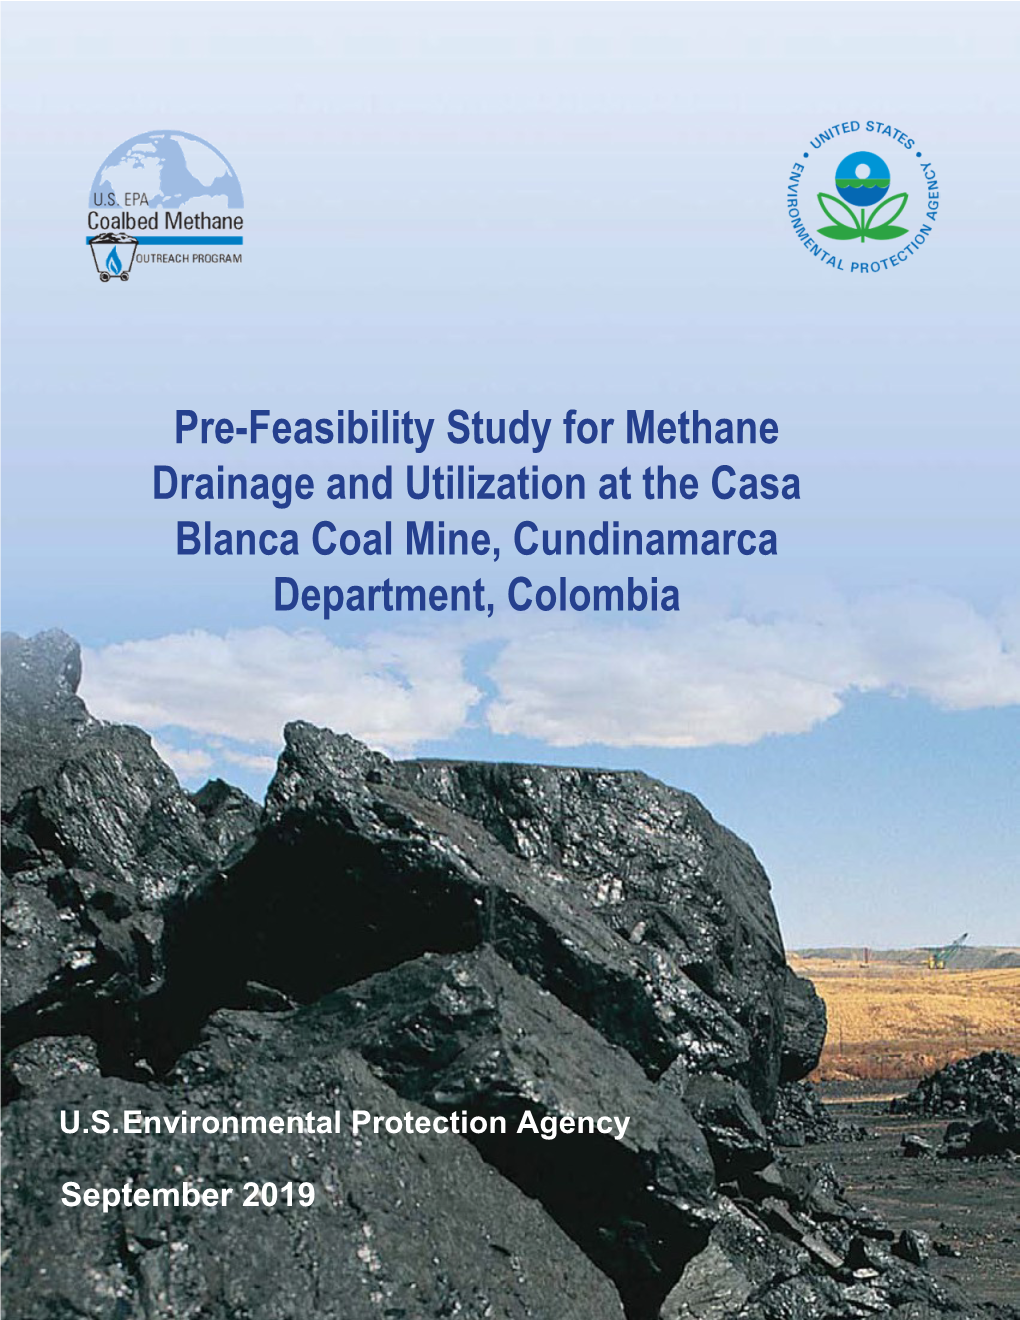 Pre-Feasibility Study for Methane Drainage and Utilization at the Casa Blanca Coal Mine, Cundinamarca Department, Colombia